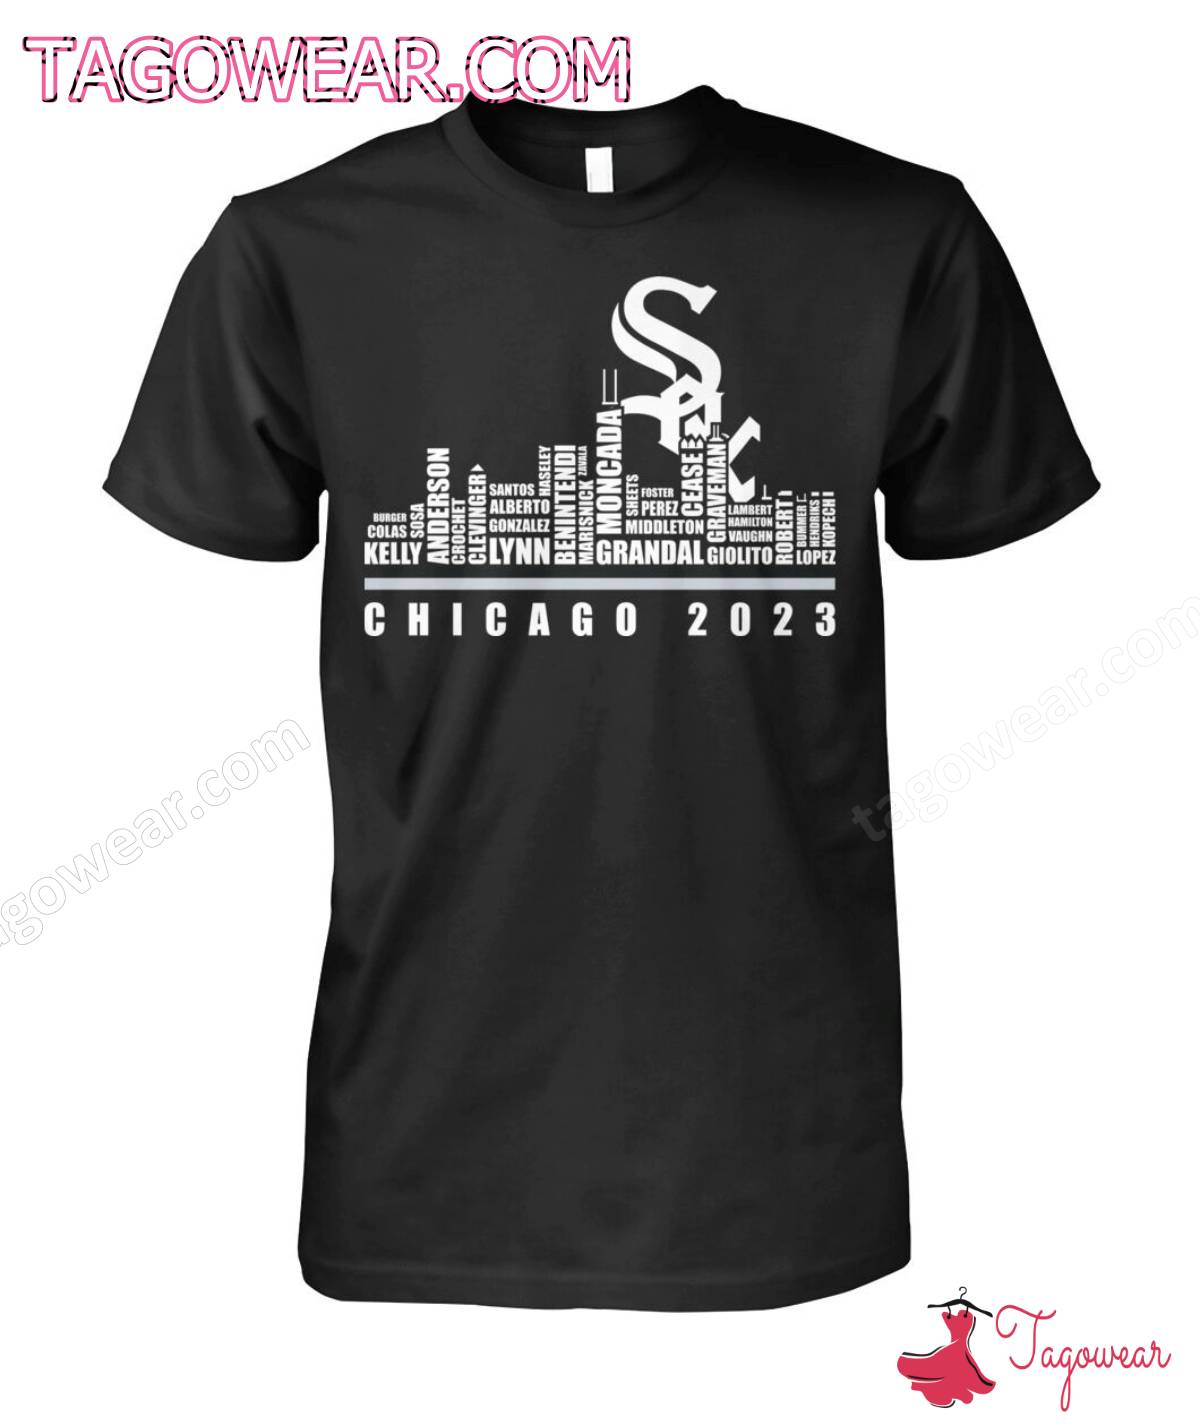 Chicago White Sox Players Chicago 2023 City Shirt